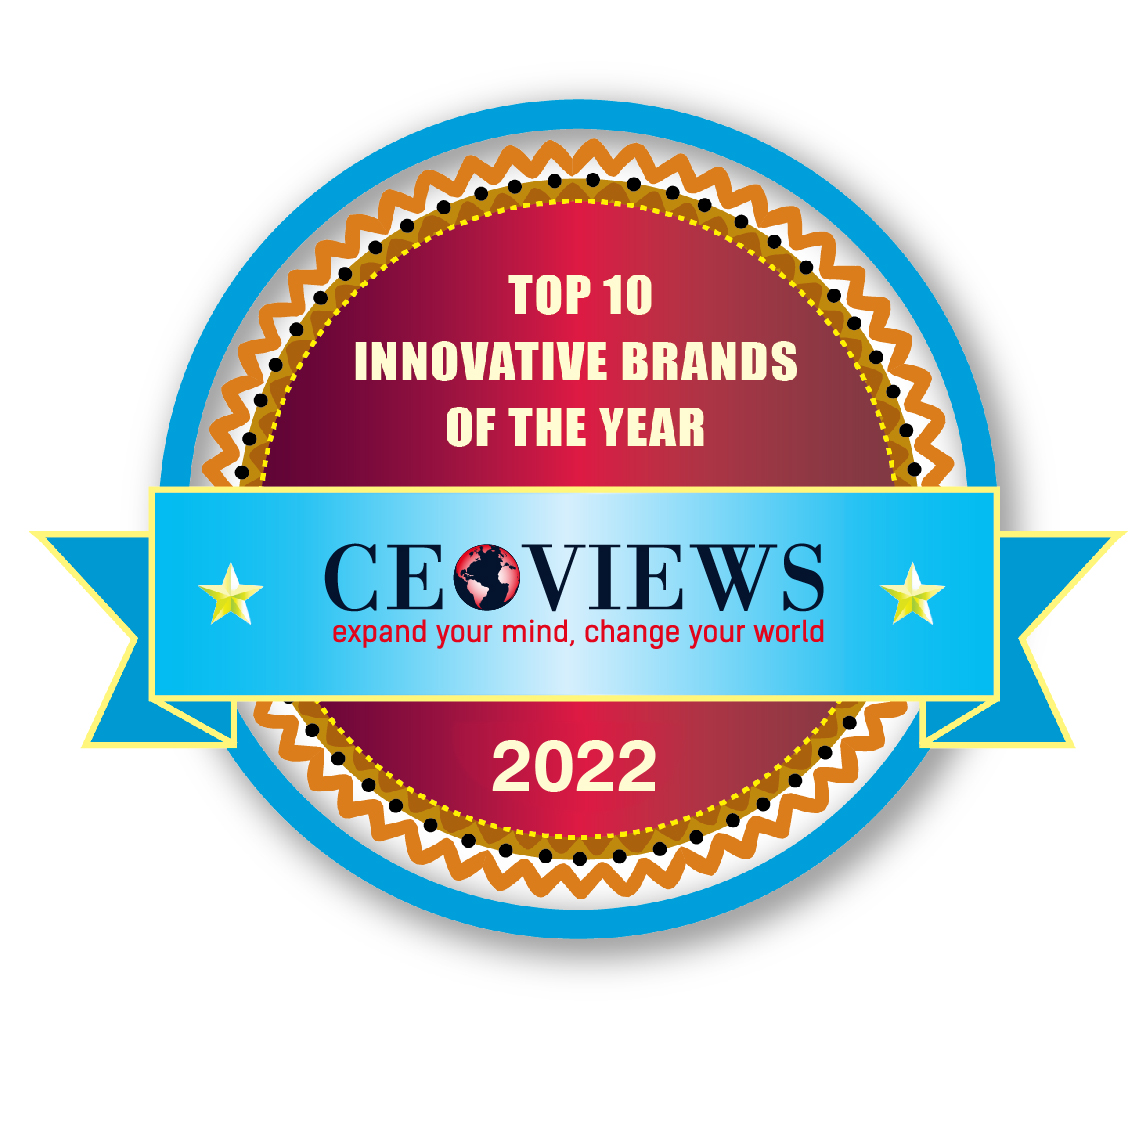 Top-10-innovative-brands-of-the-year-2020